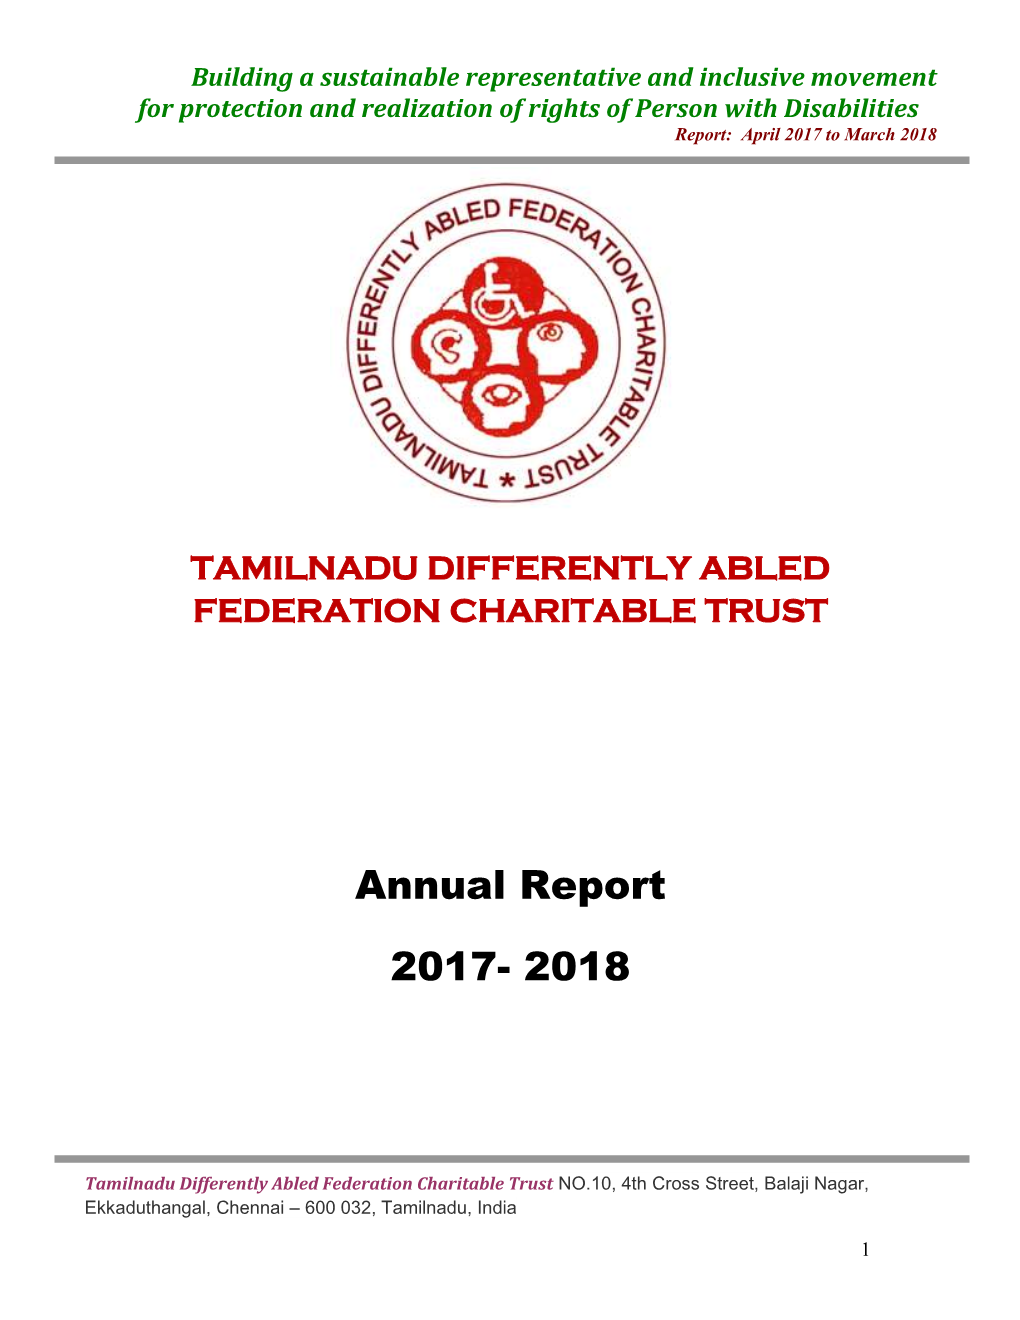 Tamilnadu Differently Abled Federation Charitable Trust